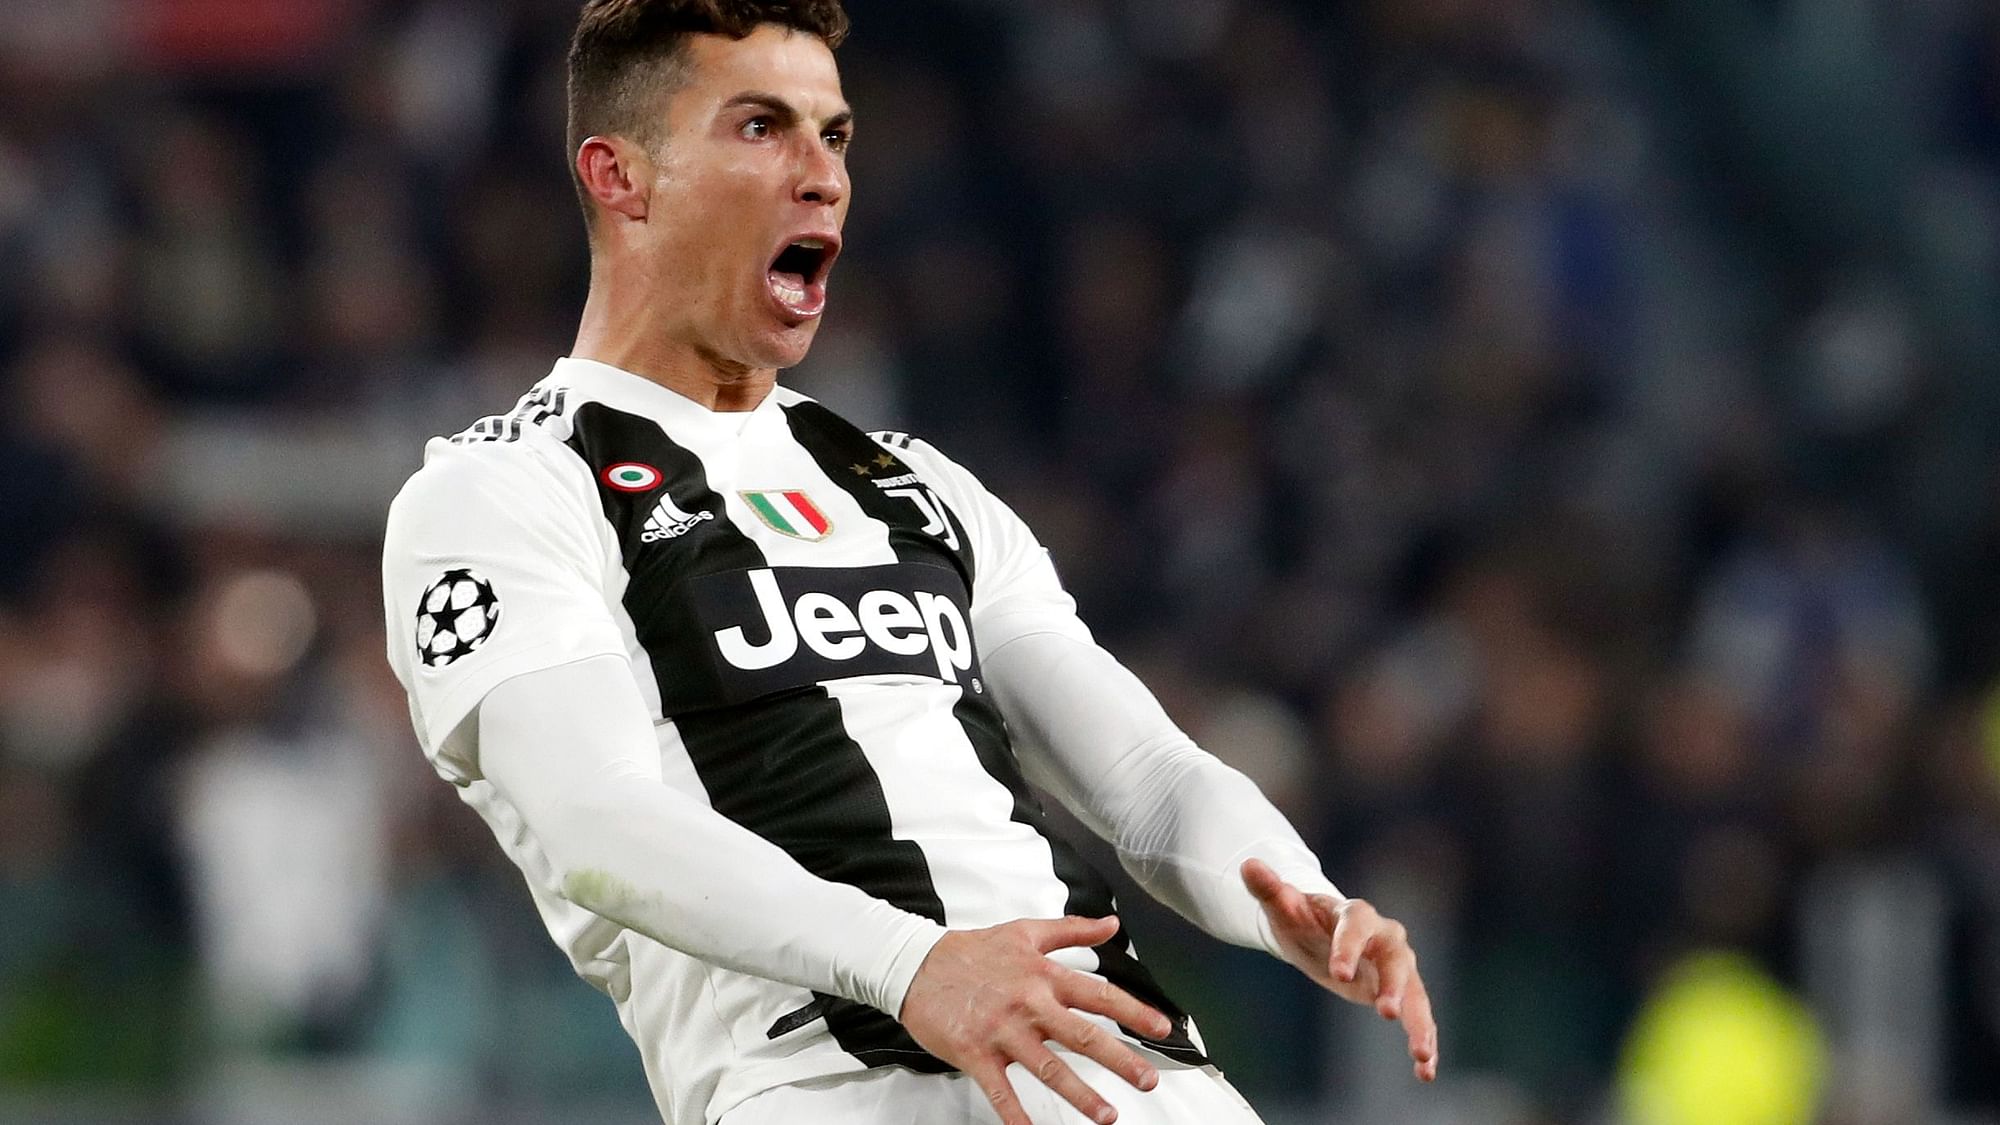 Cristiano Ronaldo celebrates after scoring Juventus’ third goal during the Champions League round of 16 match against Atletico Madrid.